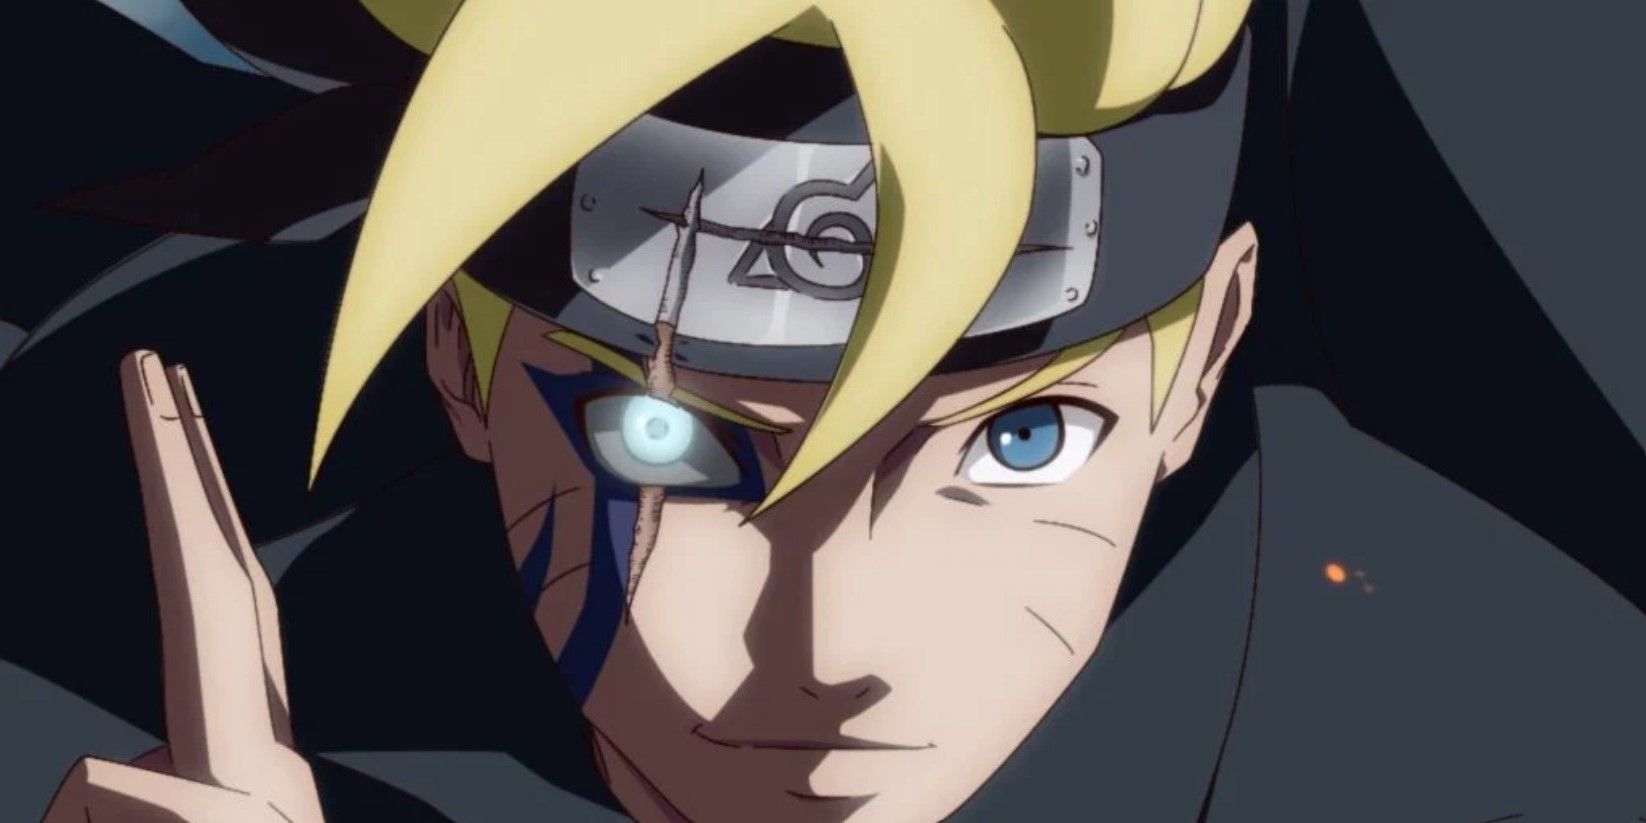 Naruto Fans Claim Boruto Chapter 79 Is Better Than One Piece's Entire Series